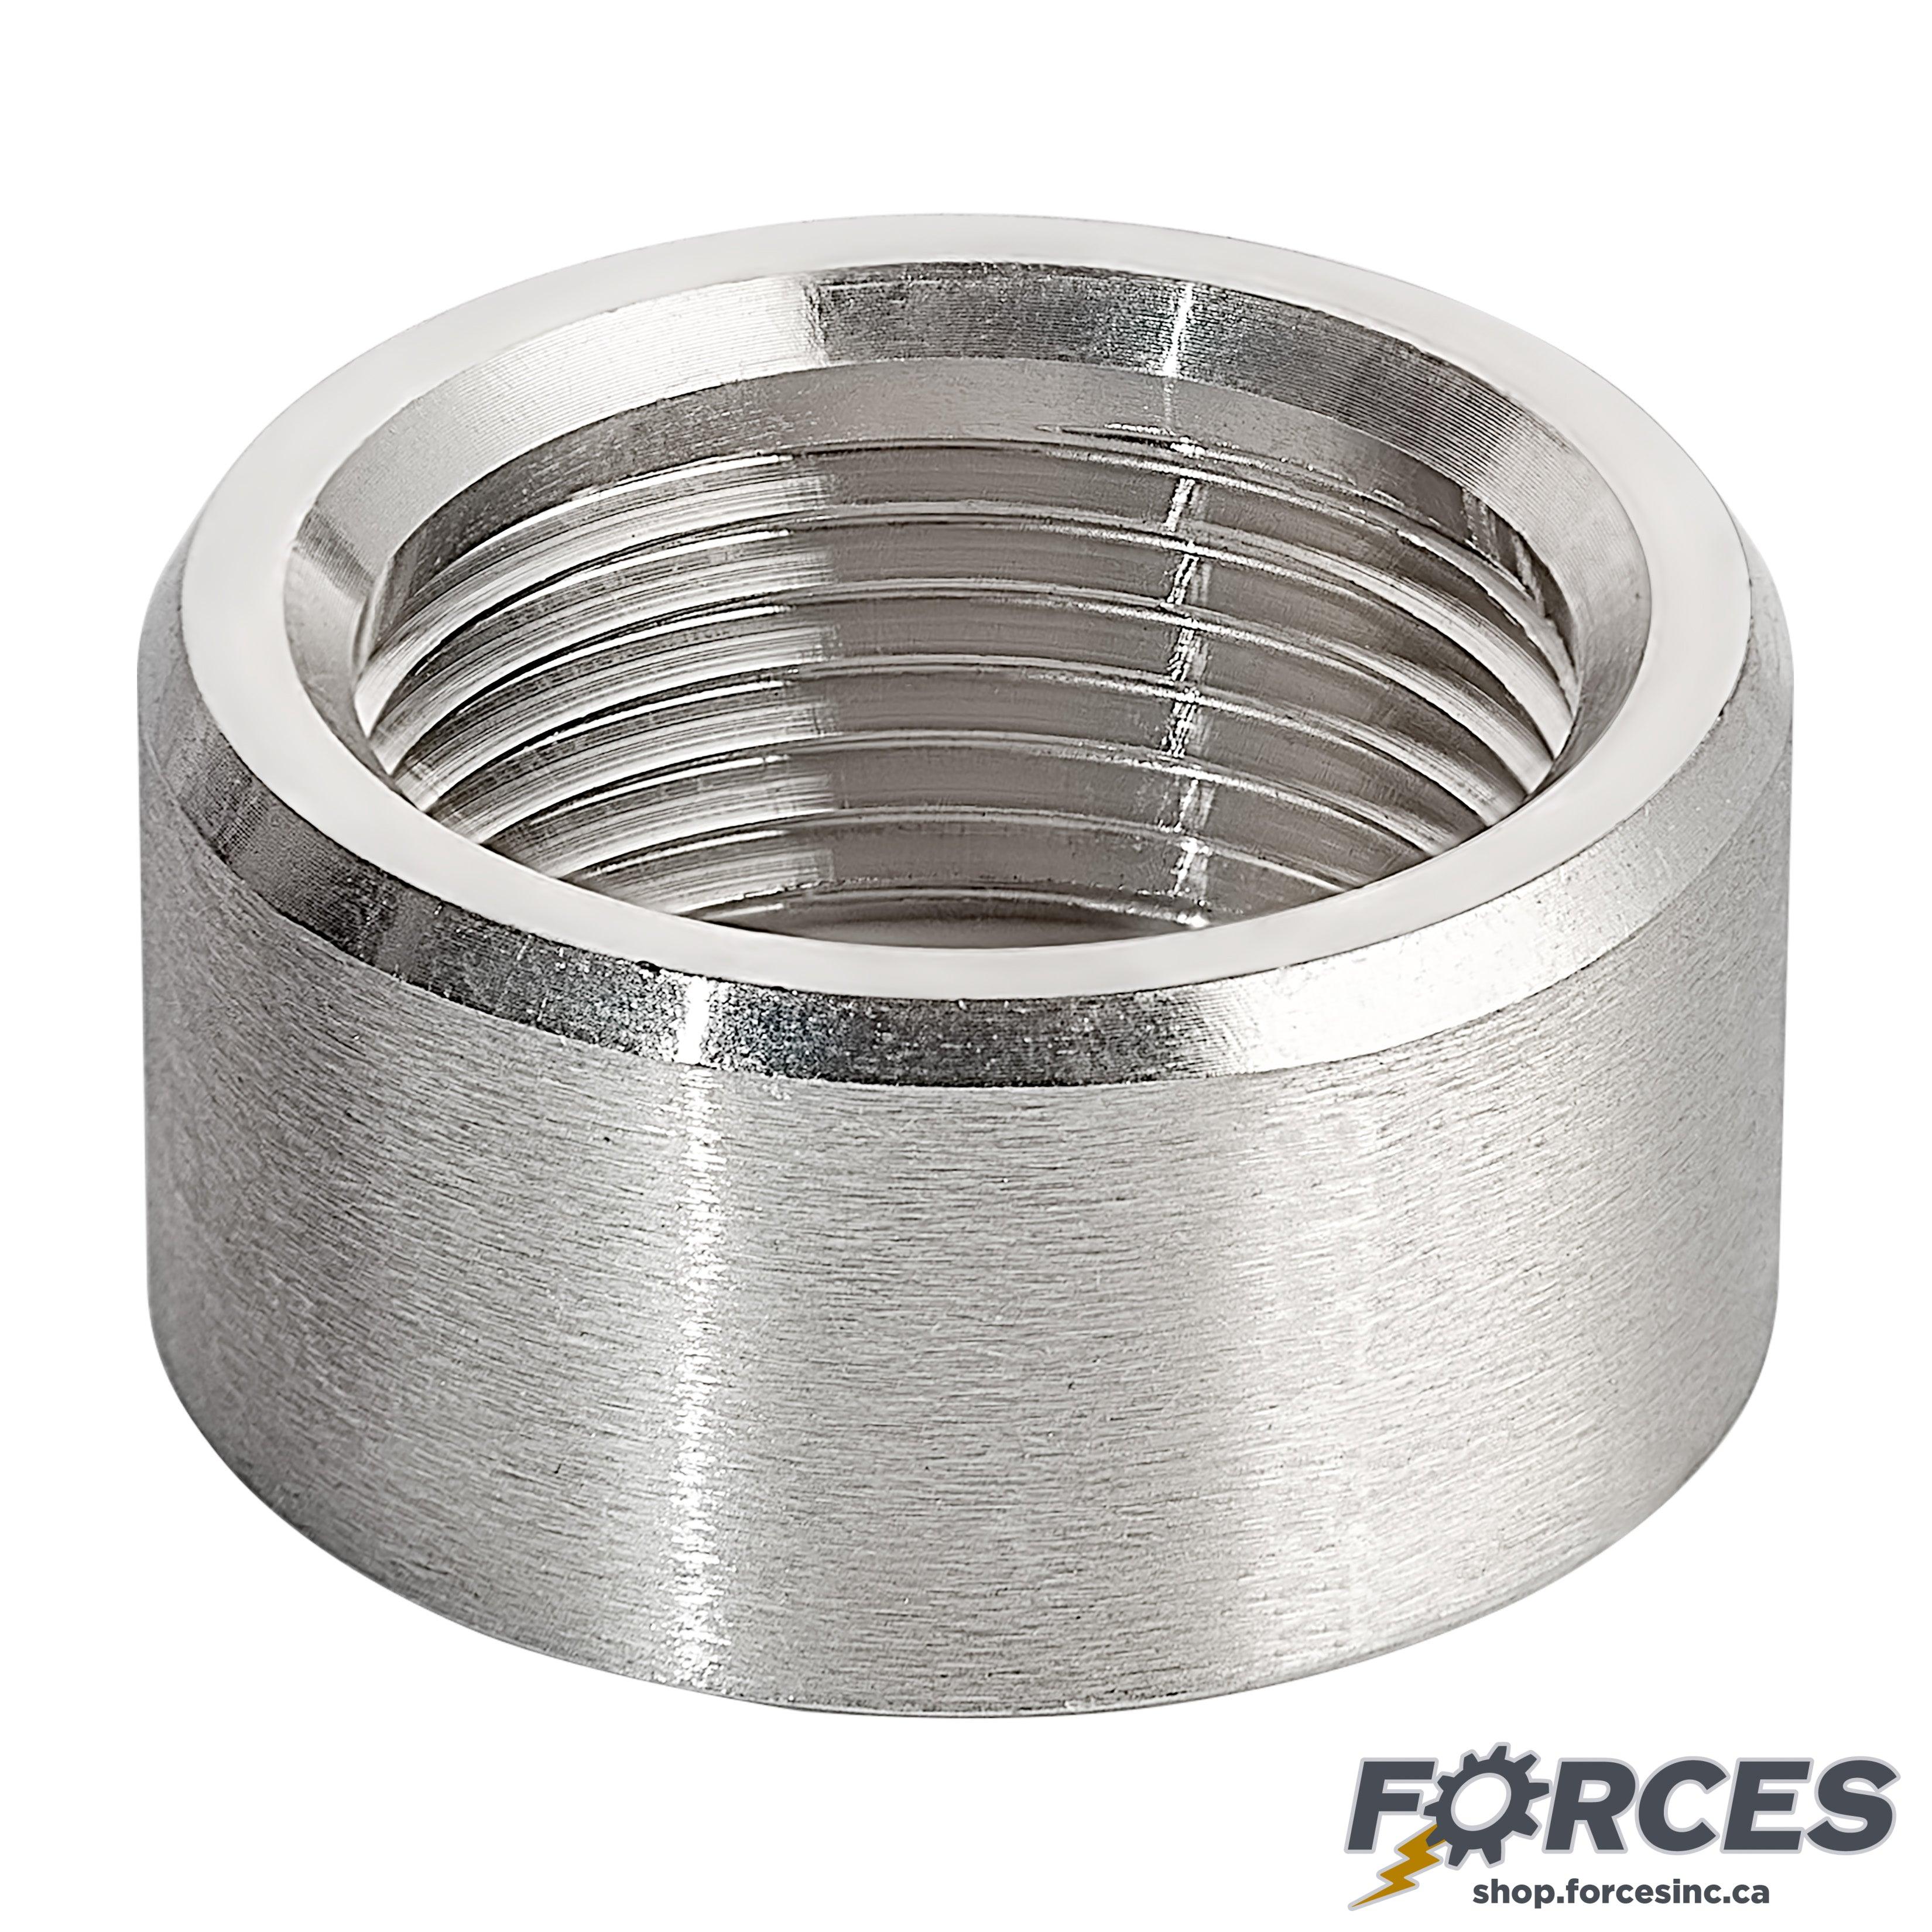 1/8" Half-Coupling NPT #150 - Stainless Steel 316 - Forces Inc